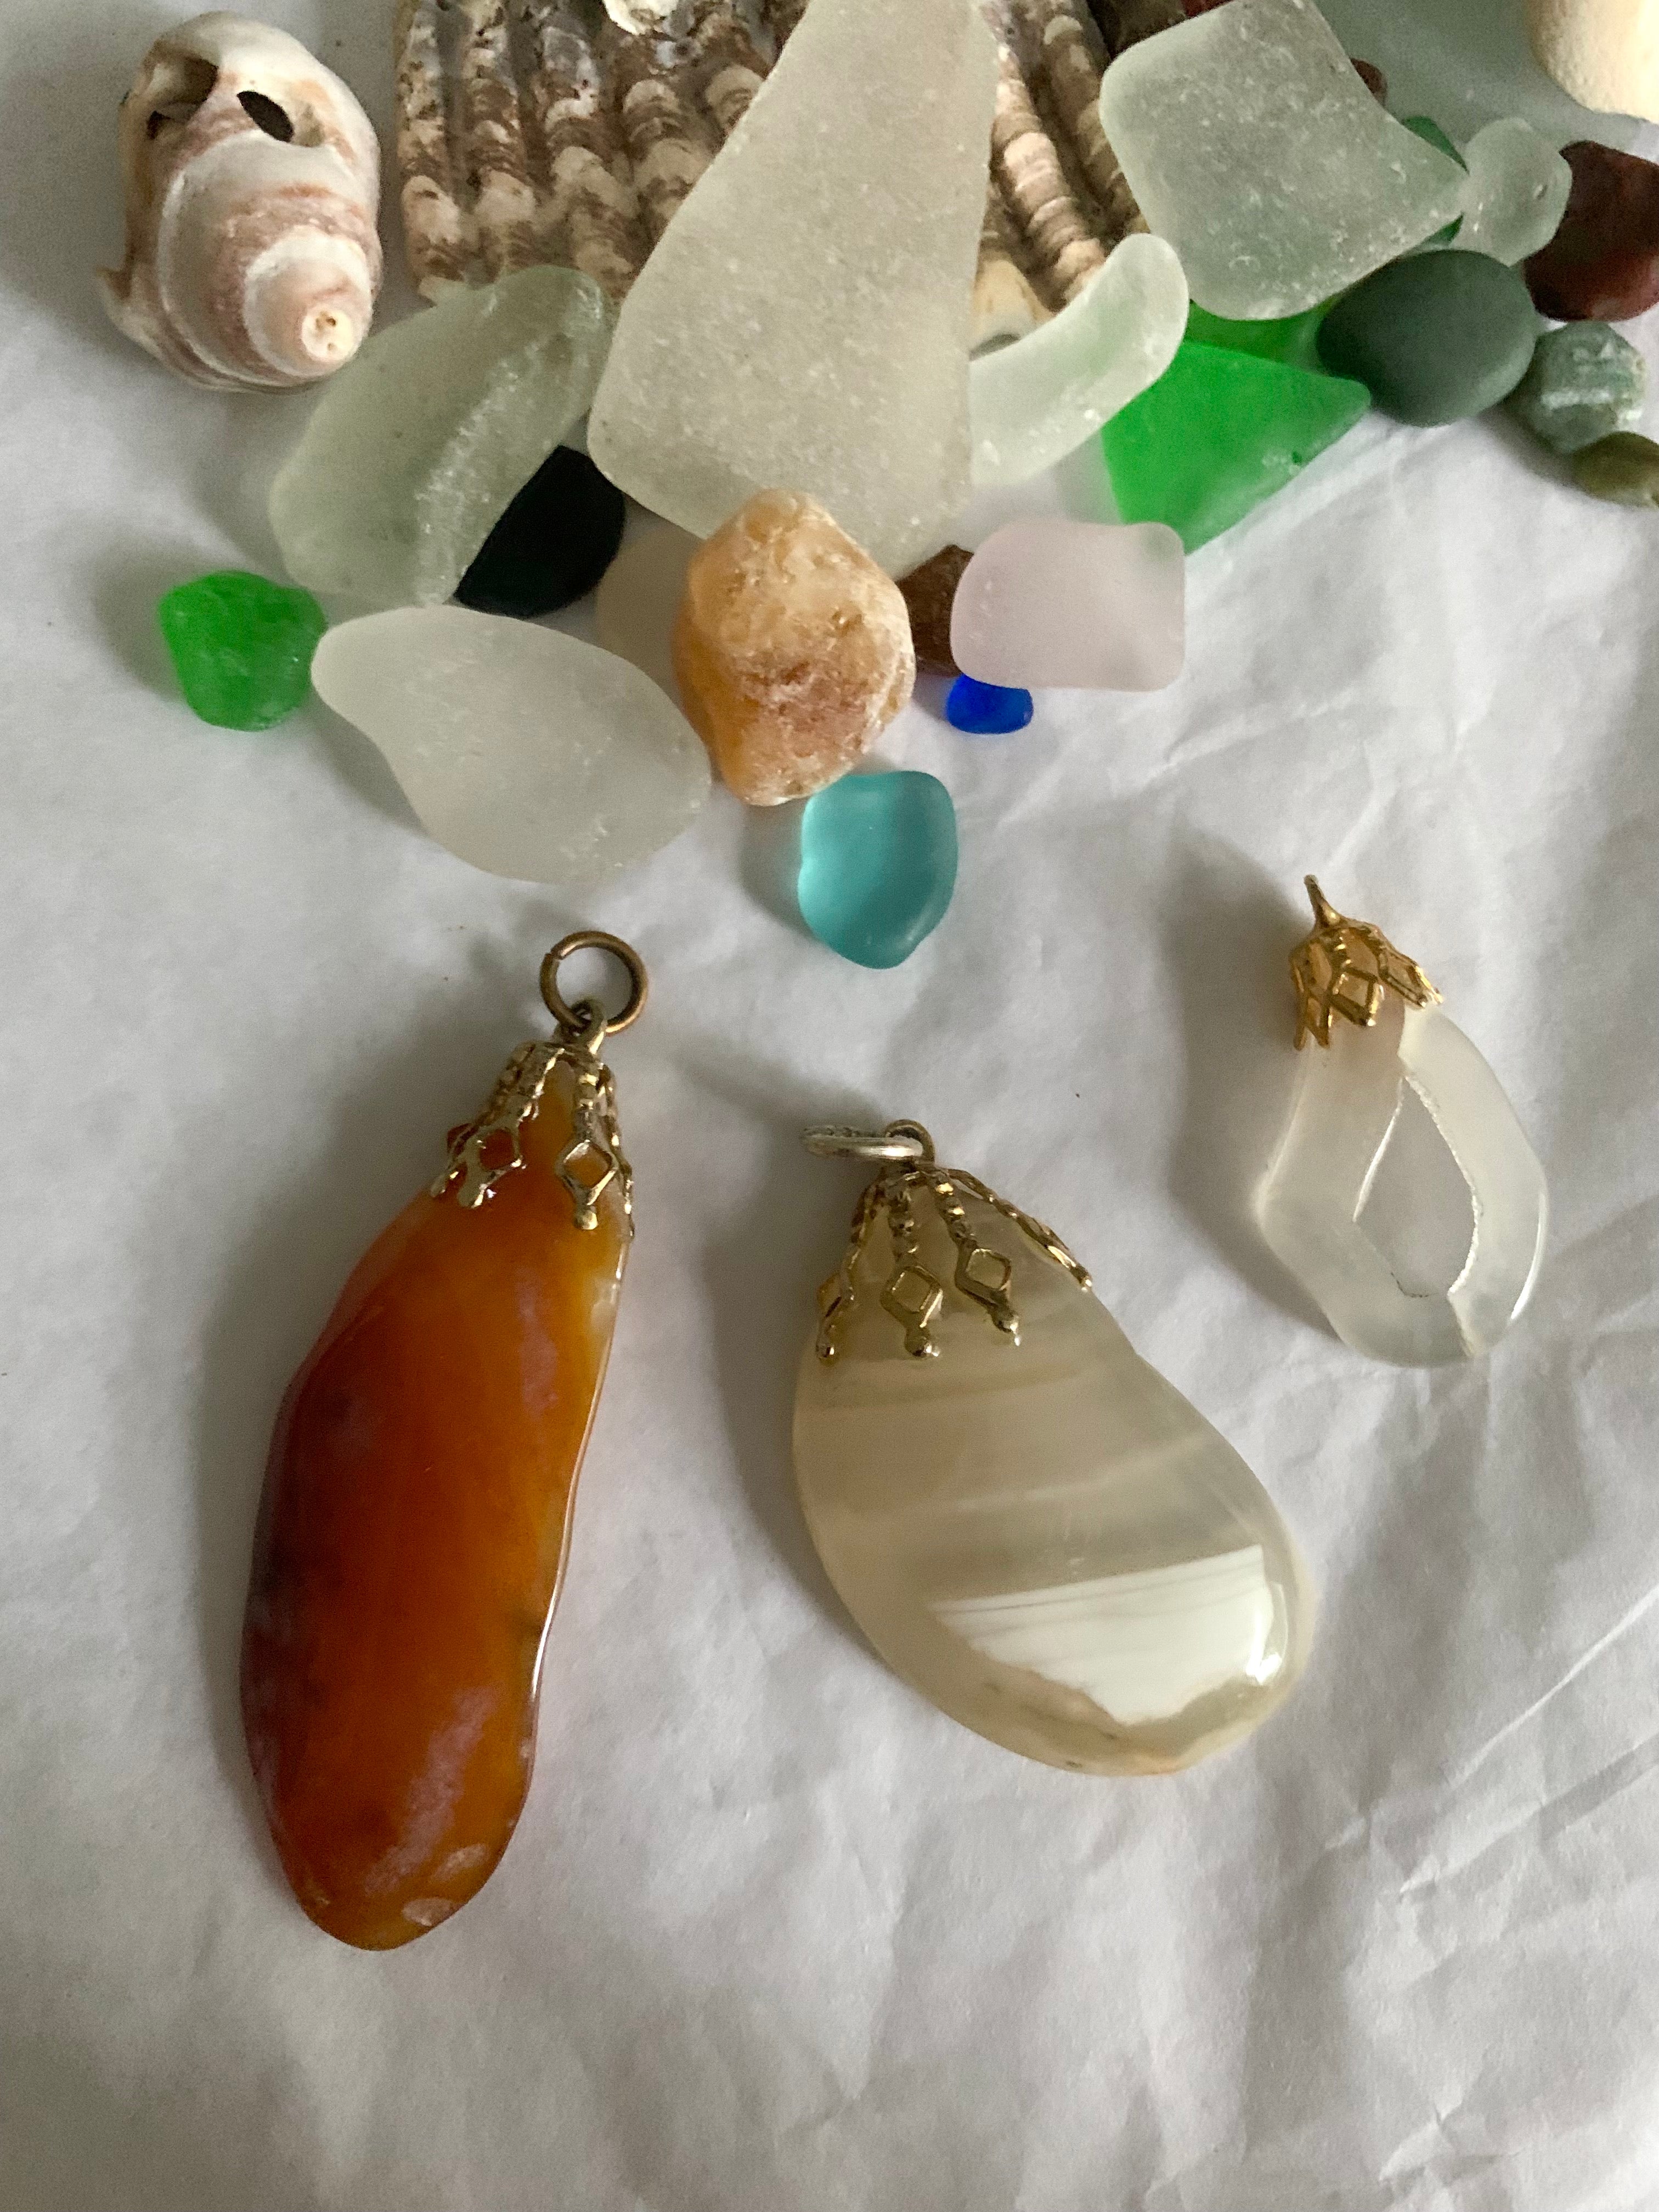 Various agates found on beach and made into jewelry pieces